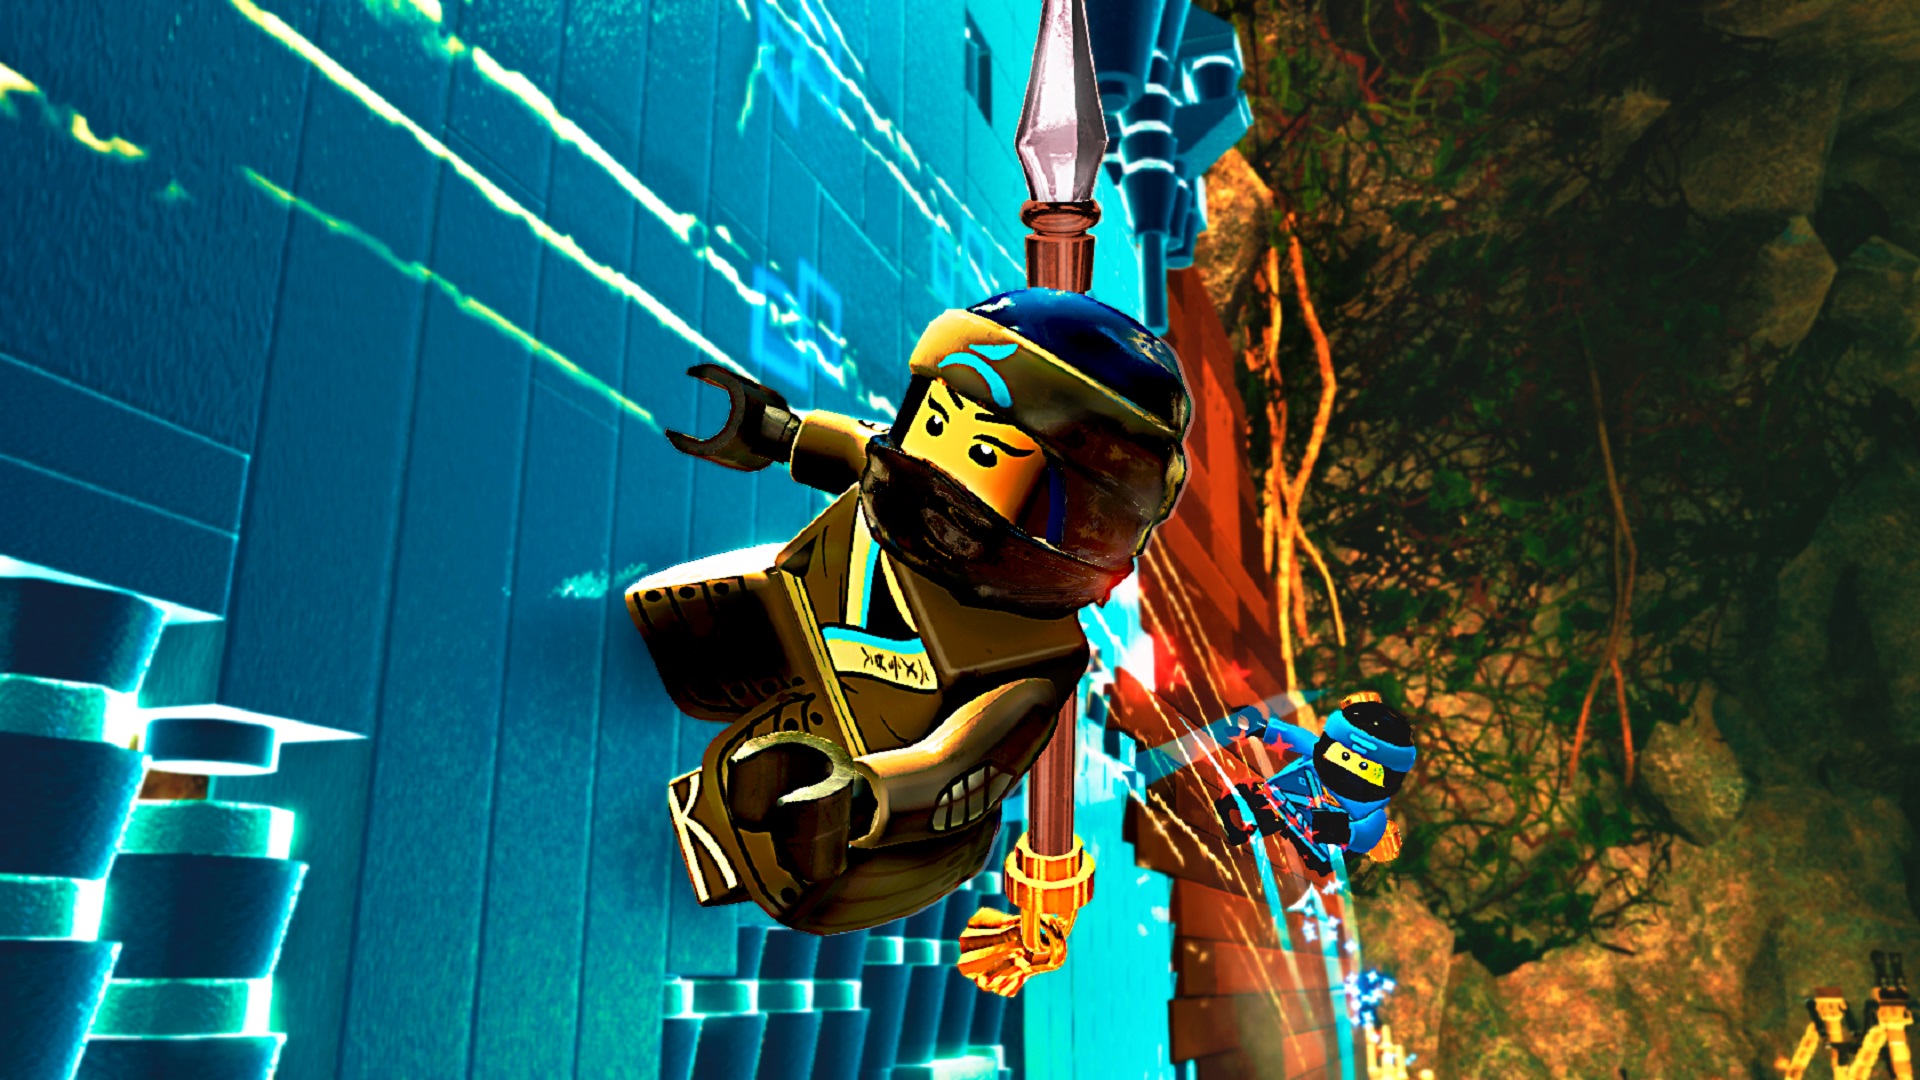 A Free Lego Ninjago Game Will Be Given Away Until May 21, 2020